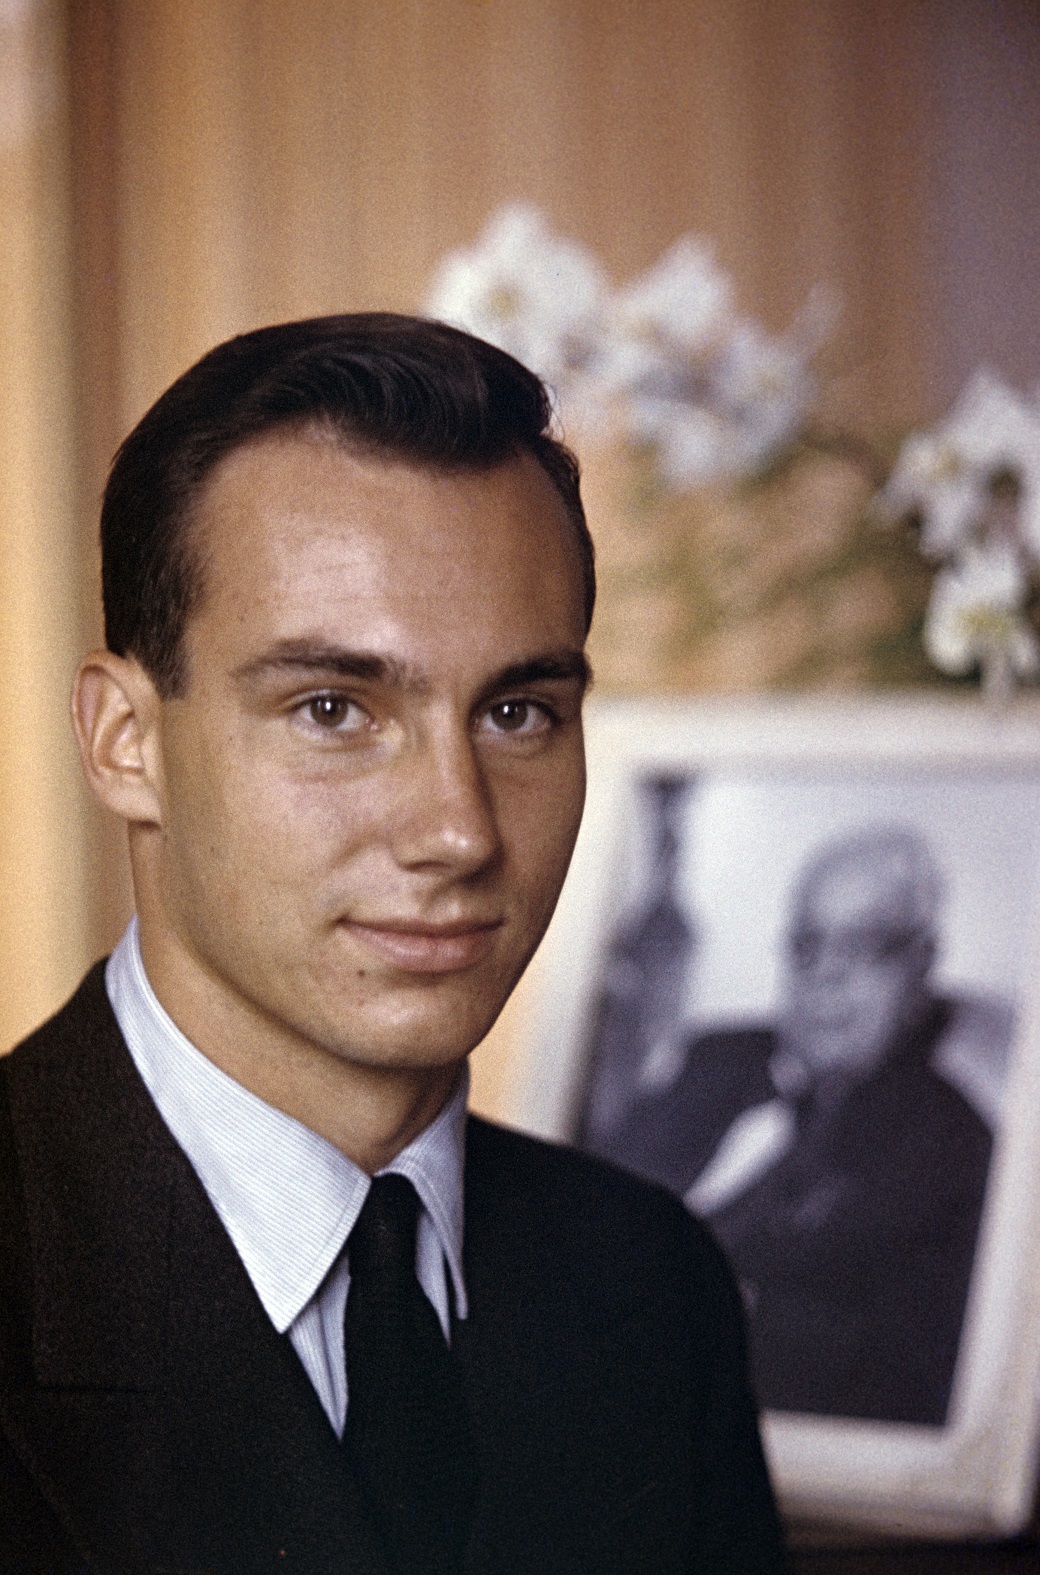 A UNIQUE PORTRAIT OF <b>MAWLANA HAZAR IMAM</b>, HIS HIGHNESS THE AGA KHAN - gettyimages_166563235-s